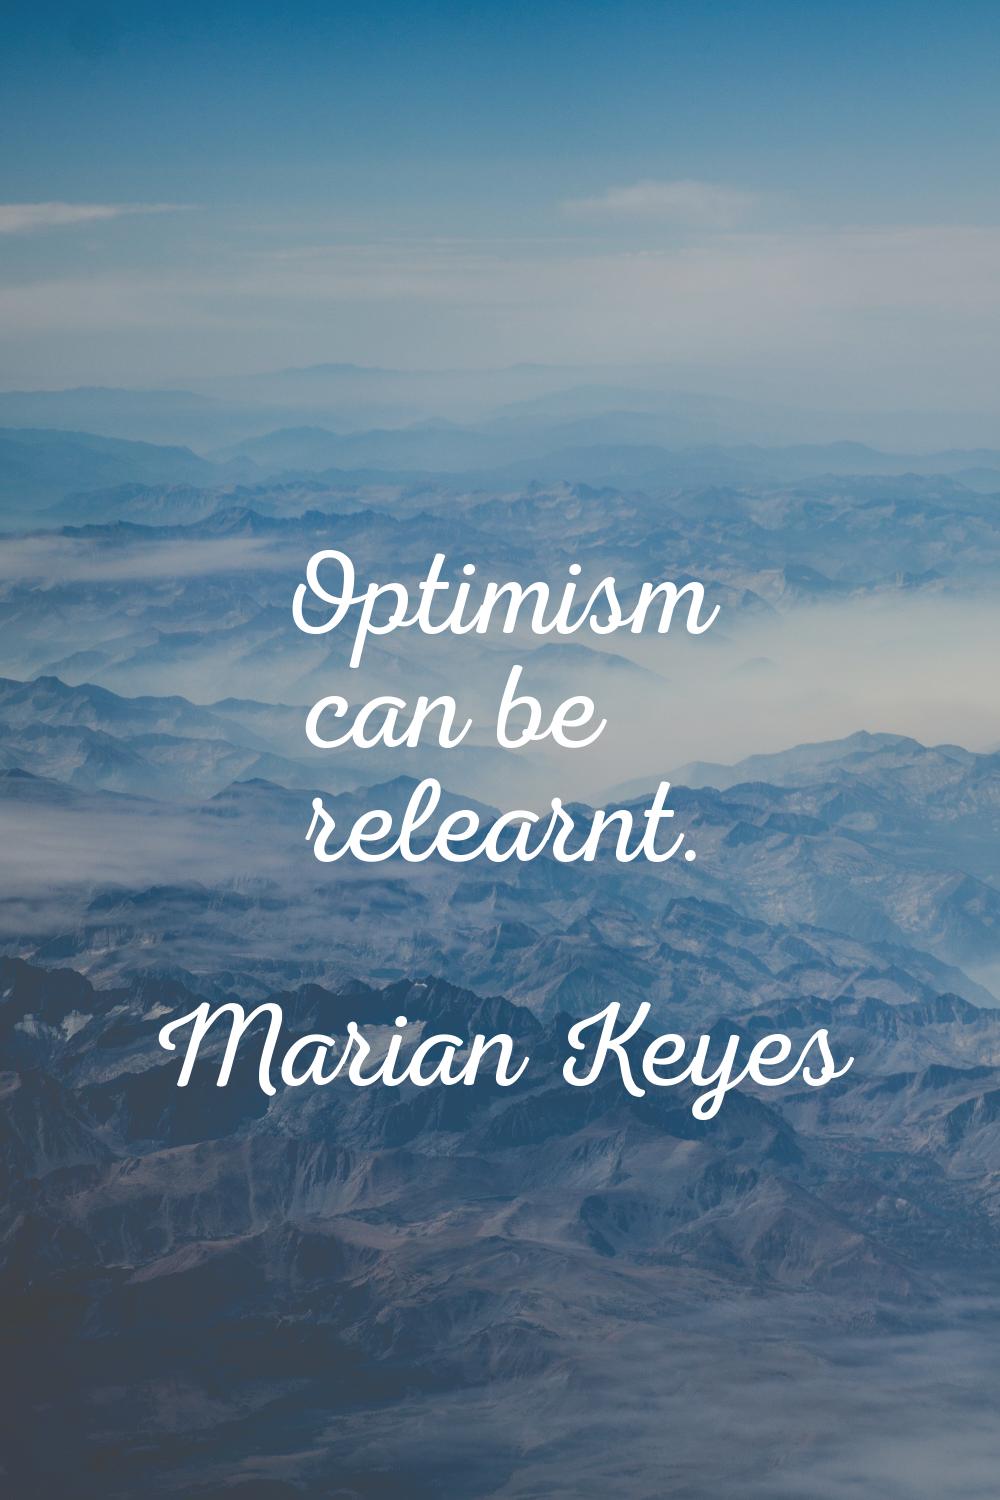 Optimism can be relearnt.